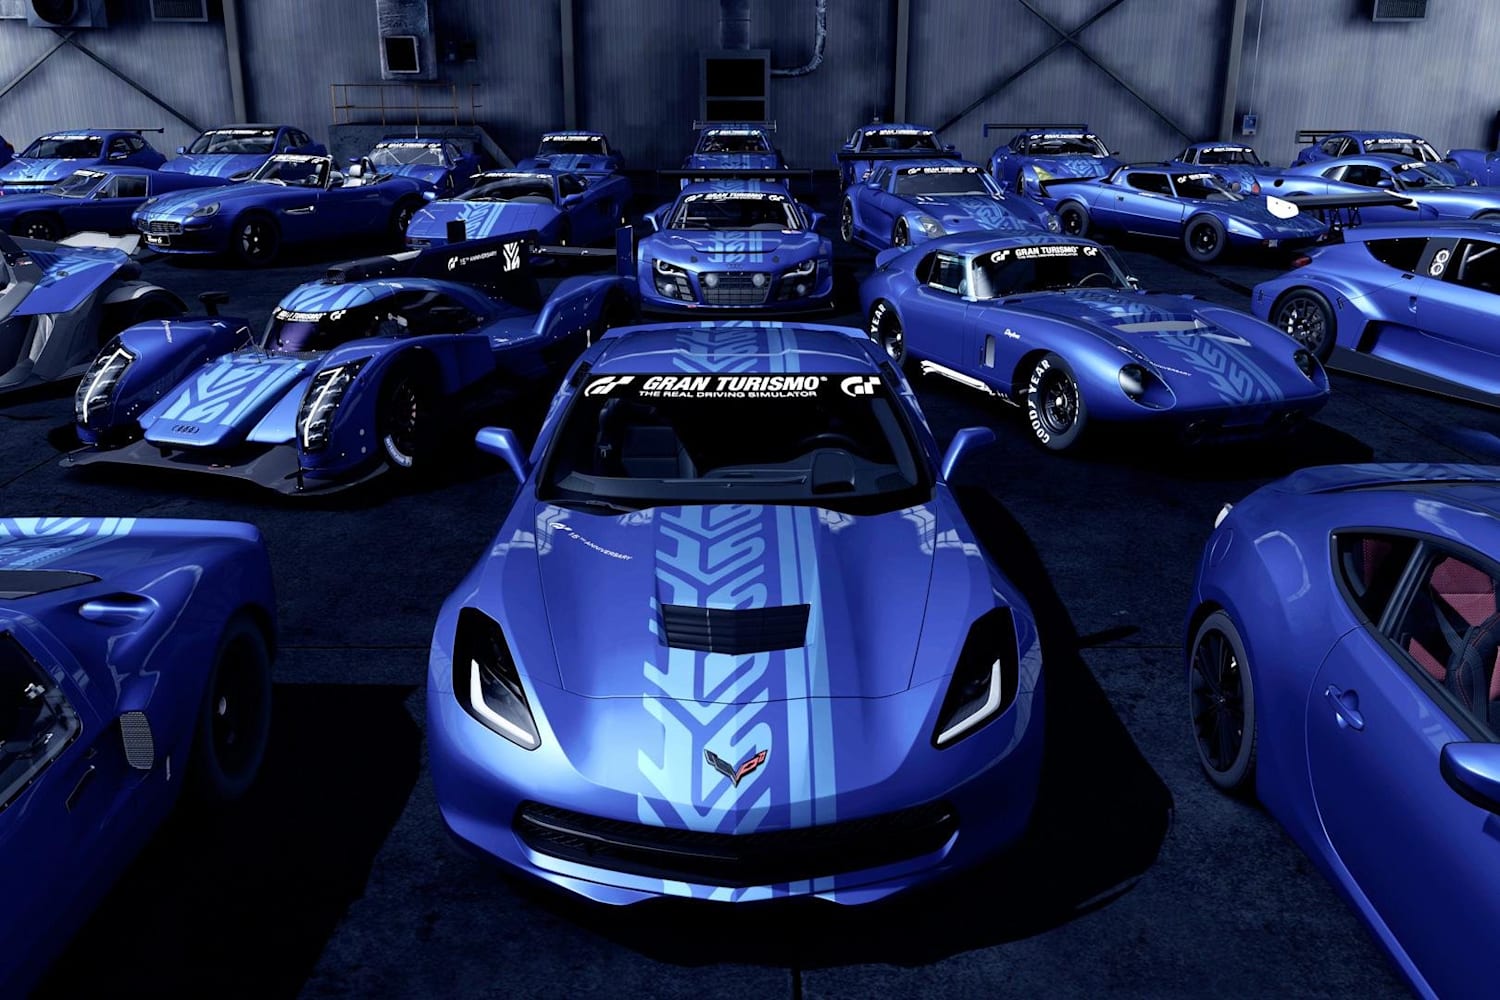 Gran Turismo 6 Car List: The best cars to buy!